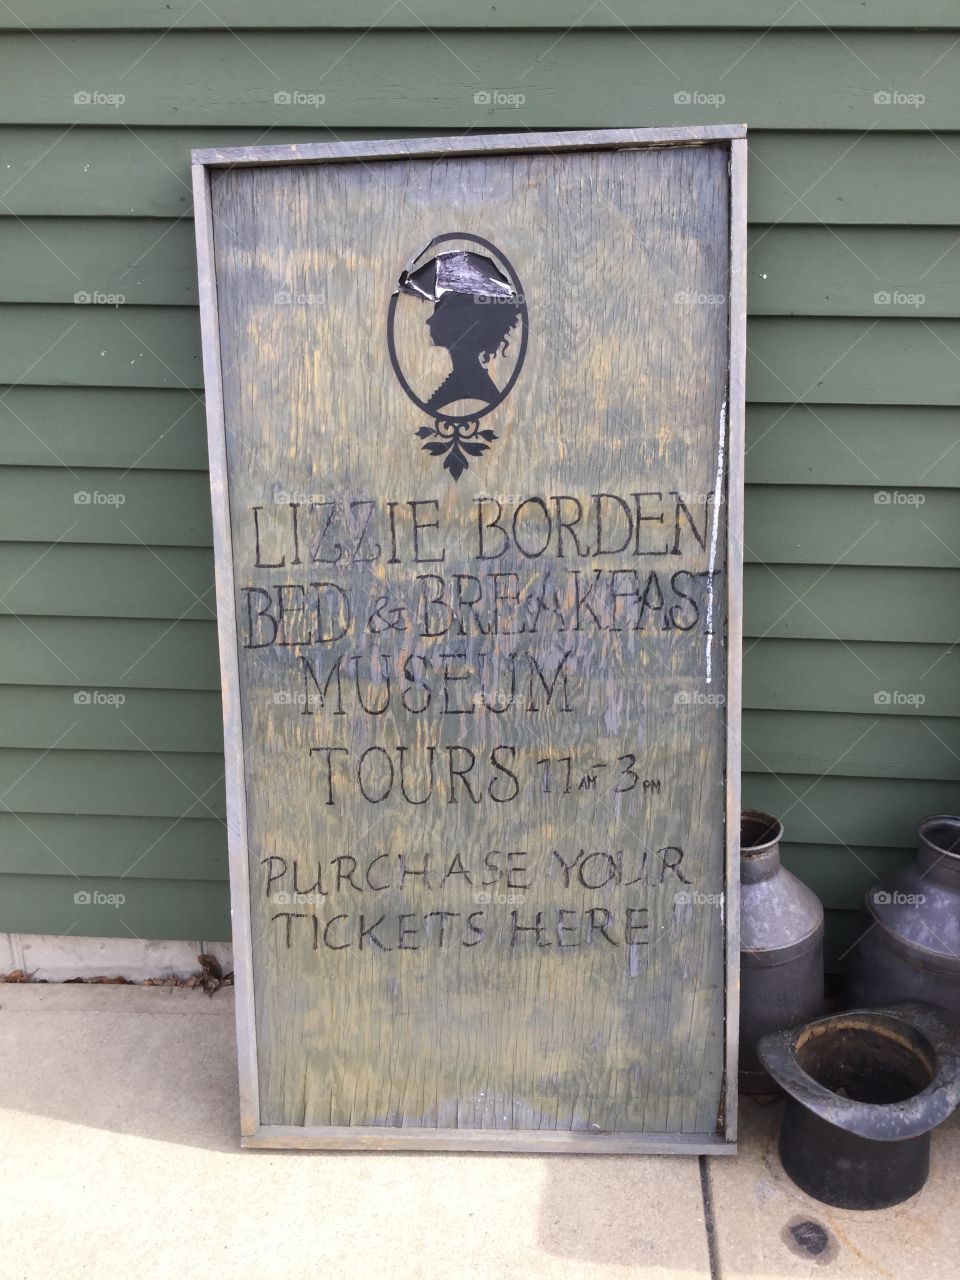 Lizzie Borden Bed and Breakfast sign.